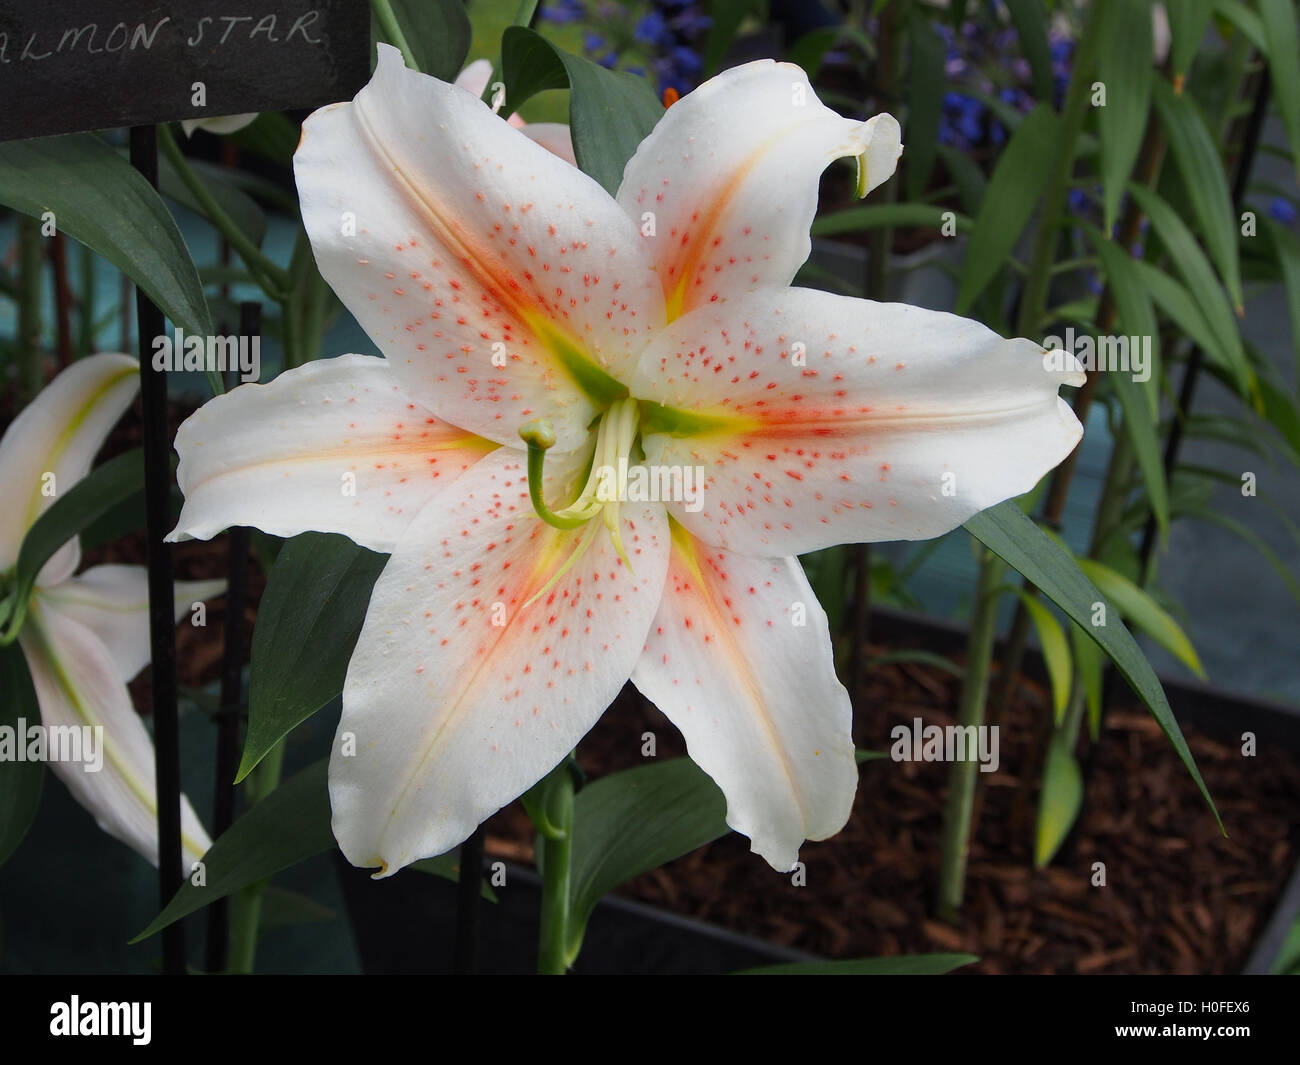 Close up shot of a single large oriental lily bloom, Lilium Salmon Star. Stock Photo